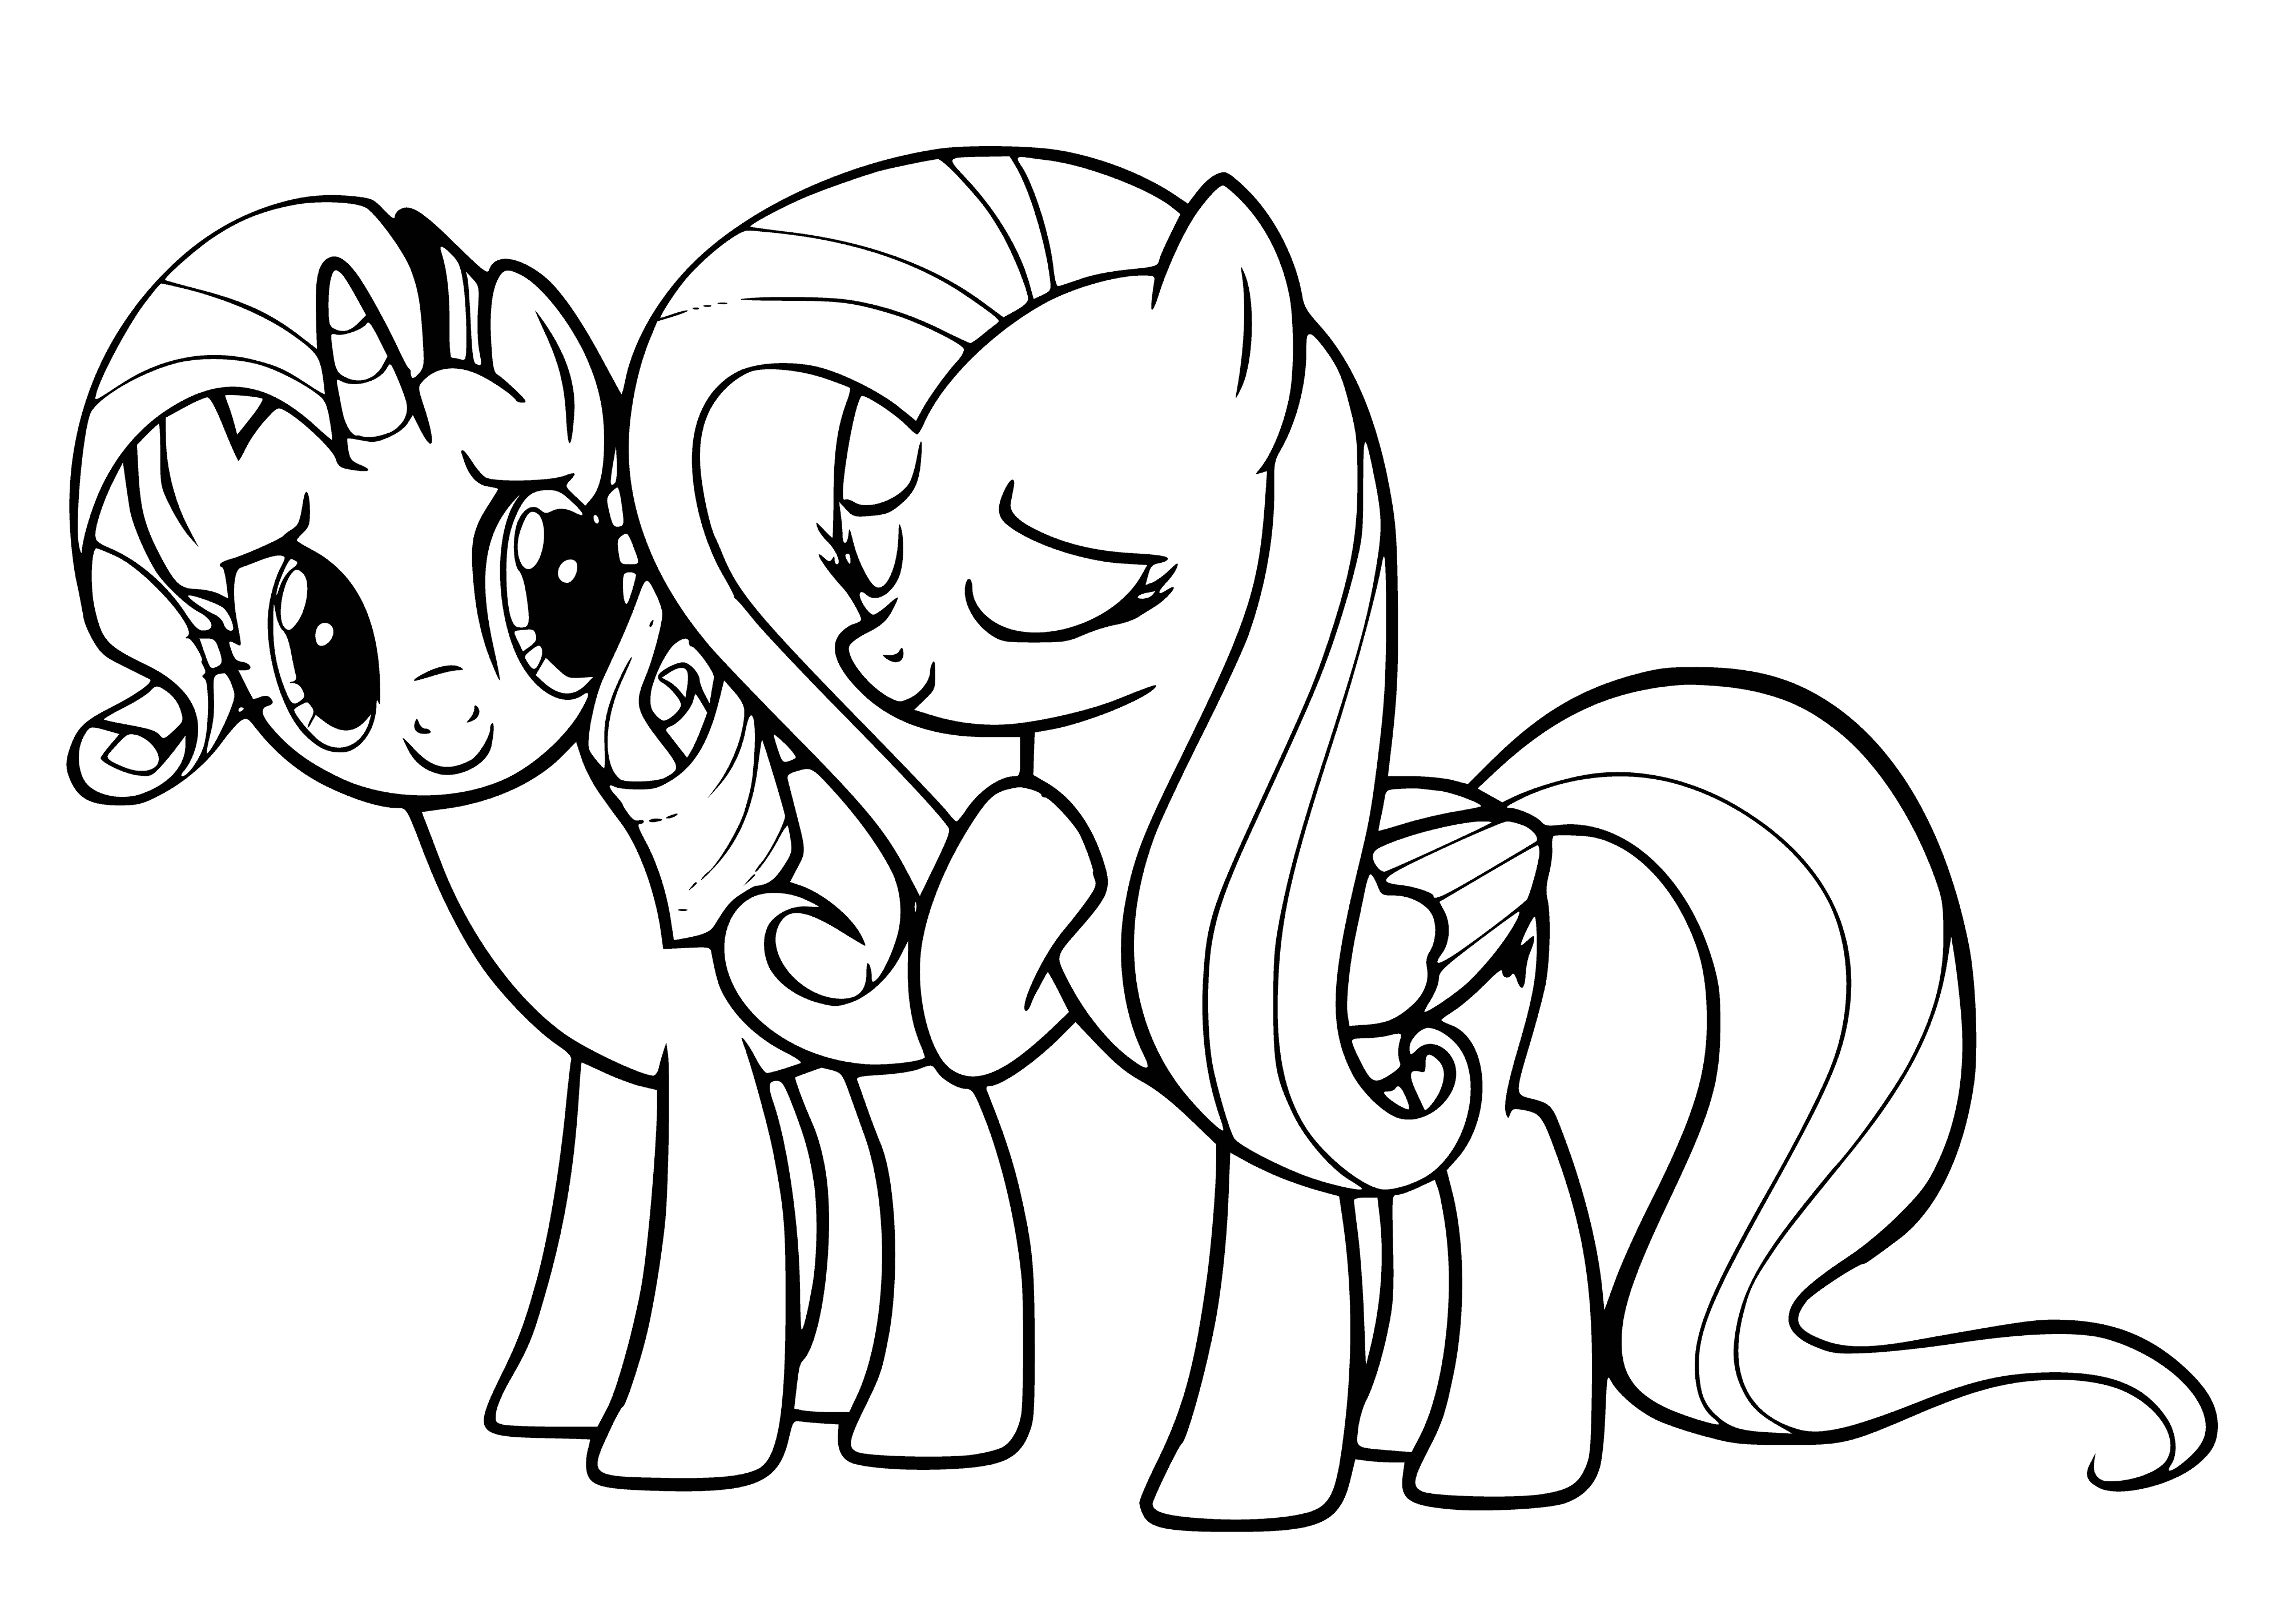 coloring page: Rarity & Fluttershy stand in a lush meadow, Rarity wearing an exquisite dress & Fluttershy with a butterfly on her flank. #MyLittlePony